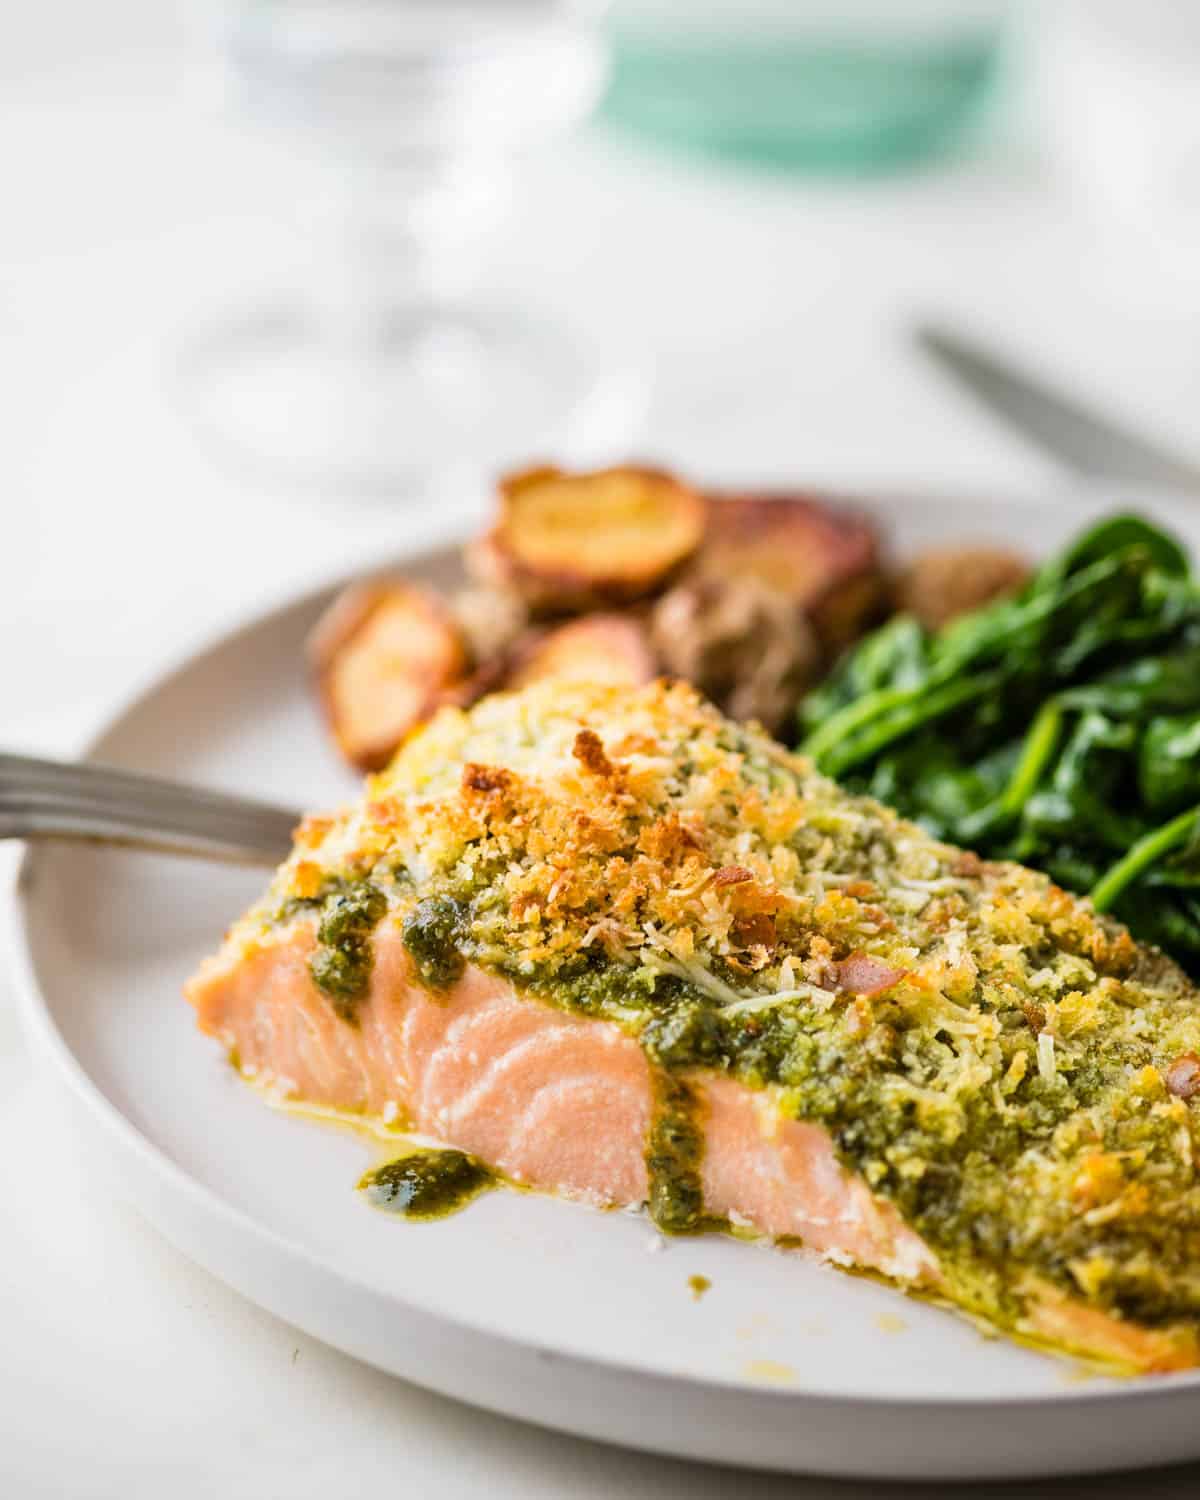 Serving the baked salmon with pesto sauce on a plate with spinach and roasted potatoes. 